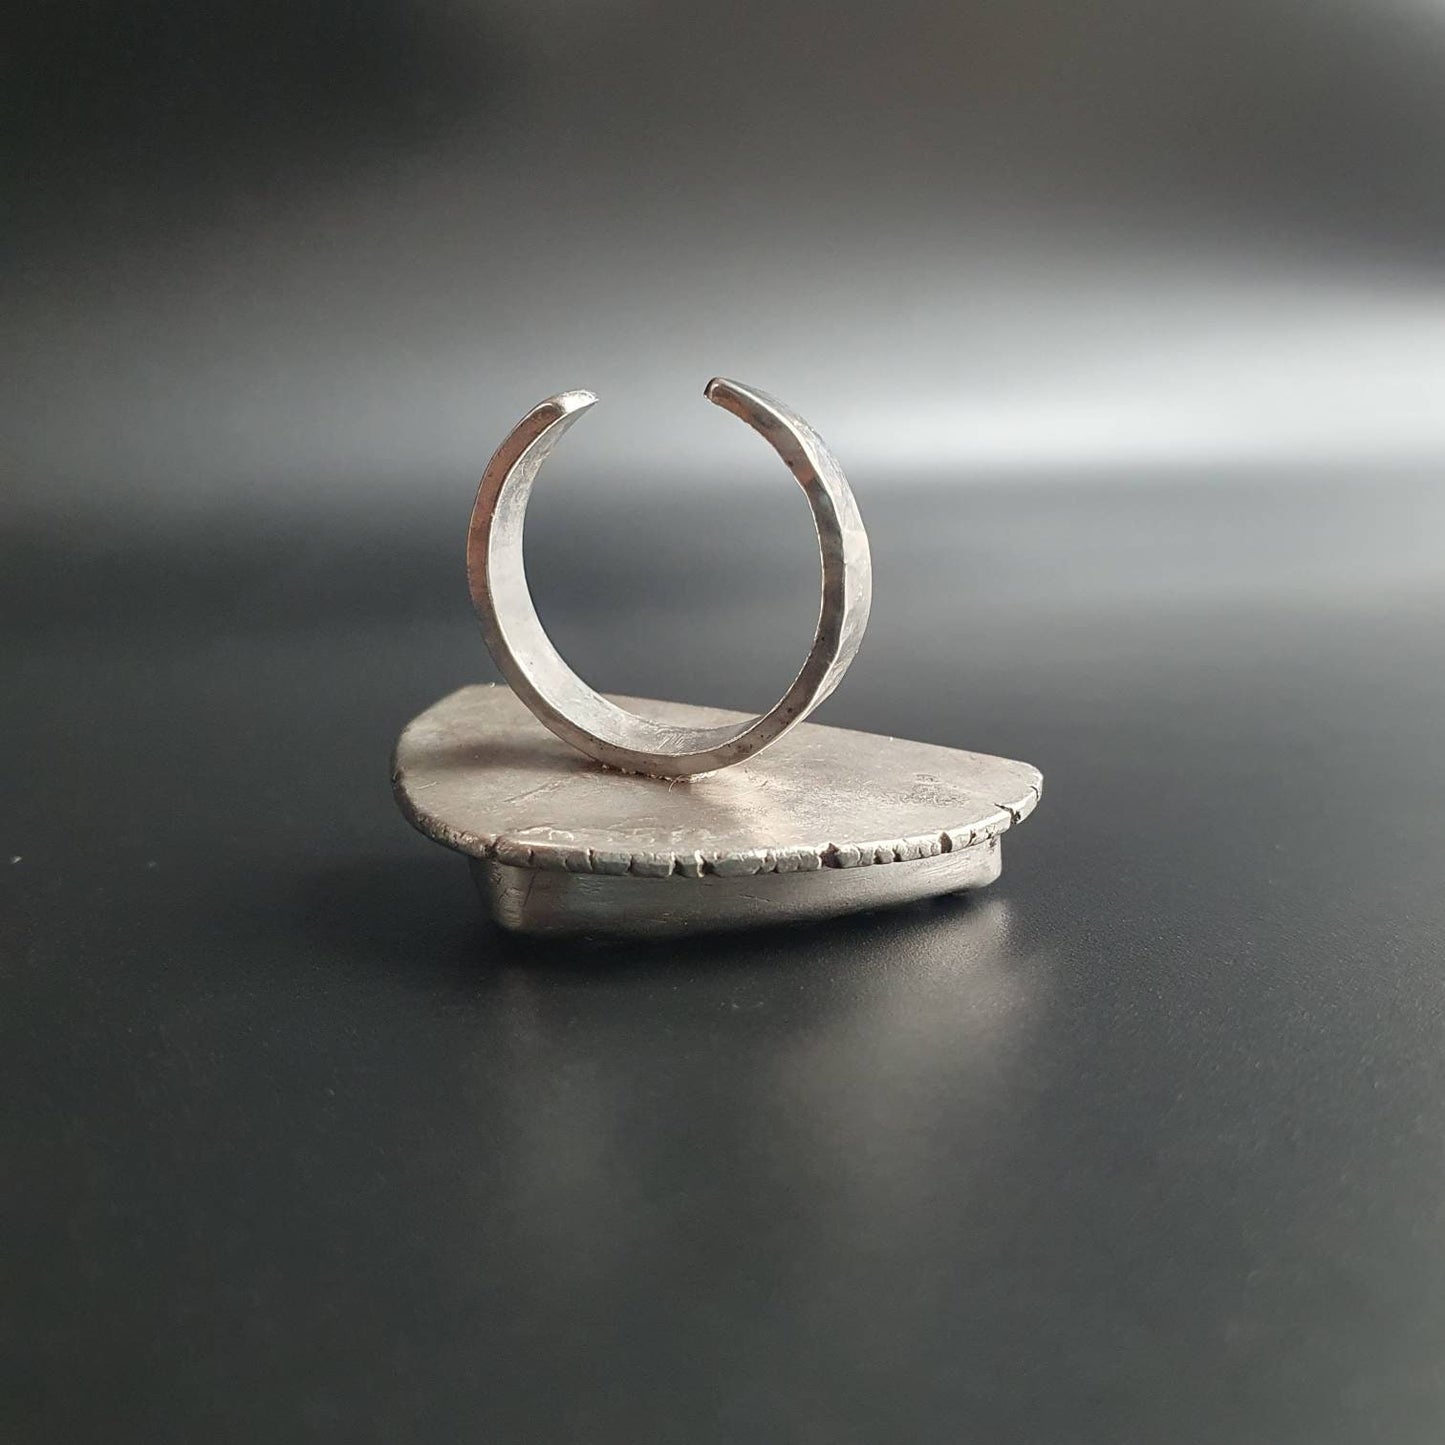 Sterling silver ring, adjustable, handmade, chunky, oversized, upcycled,vegan, ethical,gifts, artistic, historical,brutalist,raw, industrial